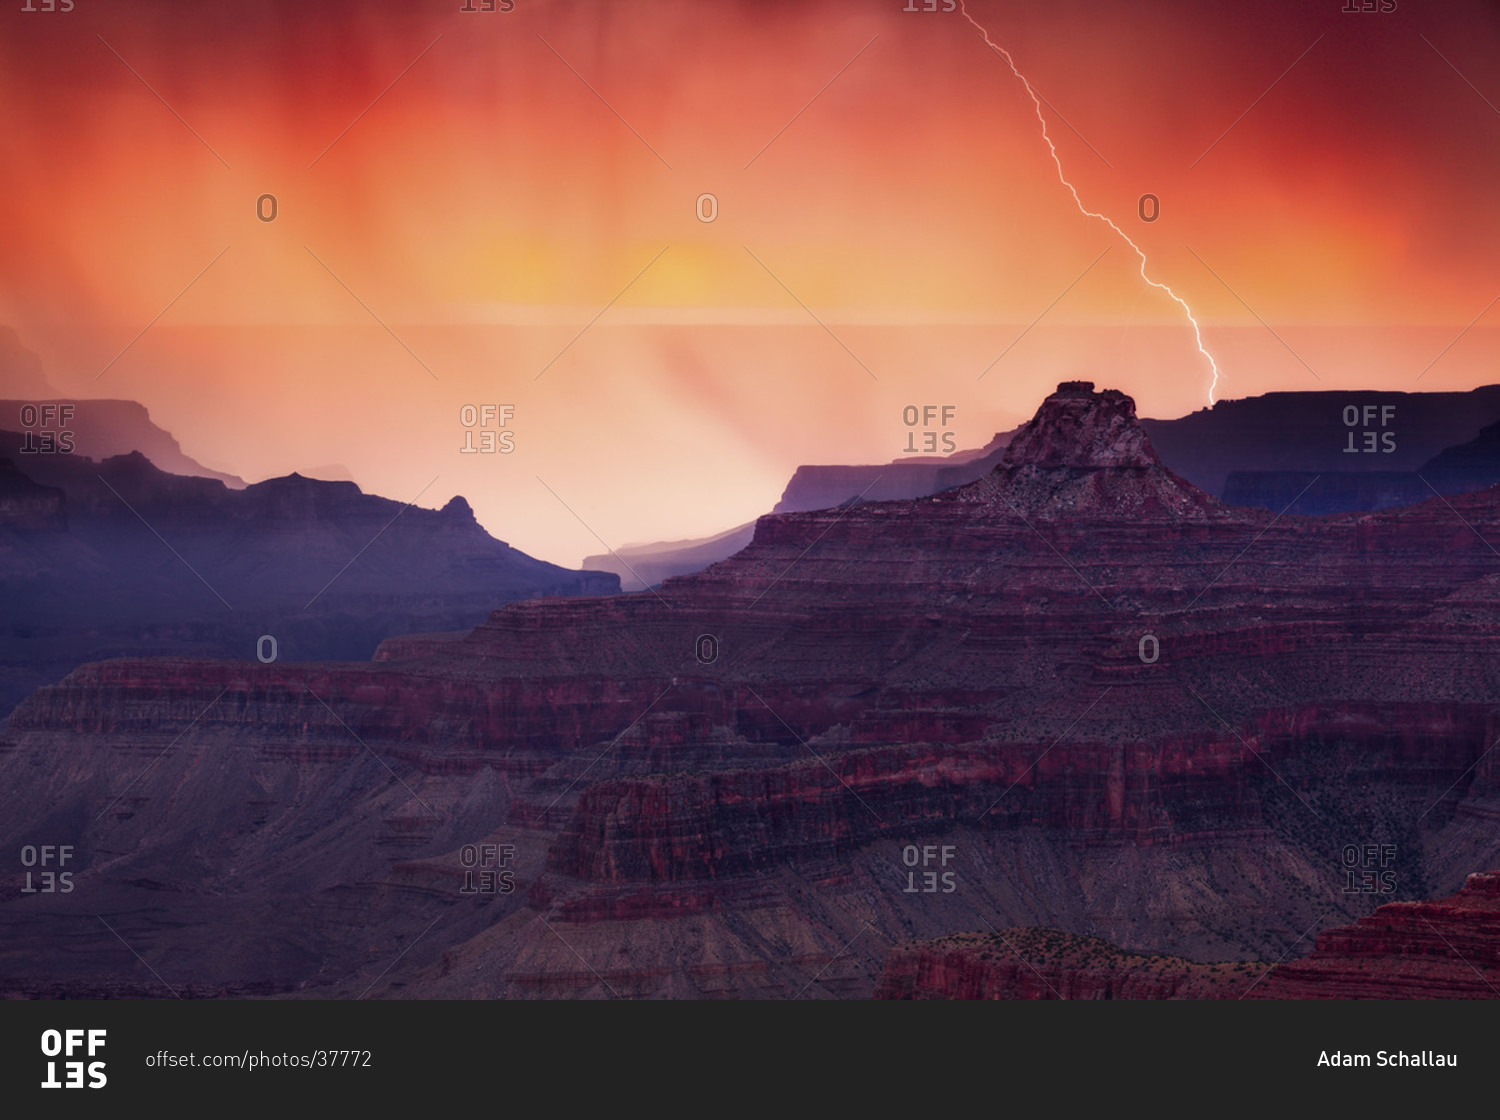 Lightning from a summer monsoon thunderstorm strikes a ridge in the Grand Canyon at sunset